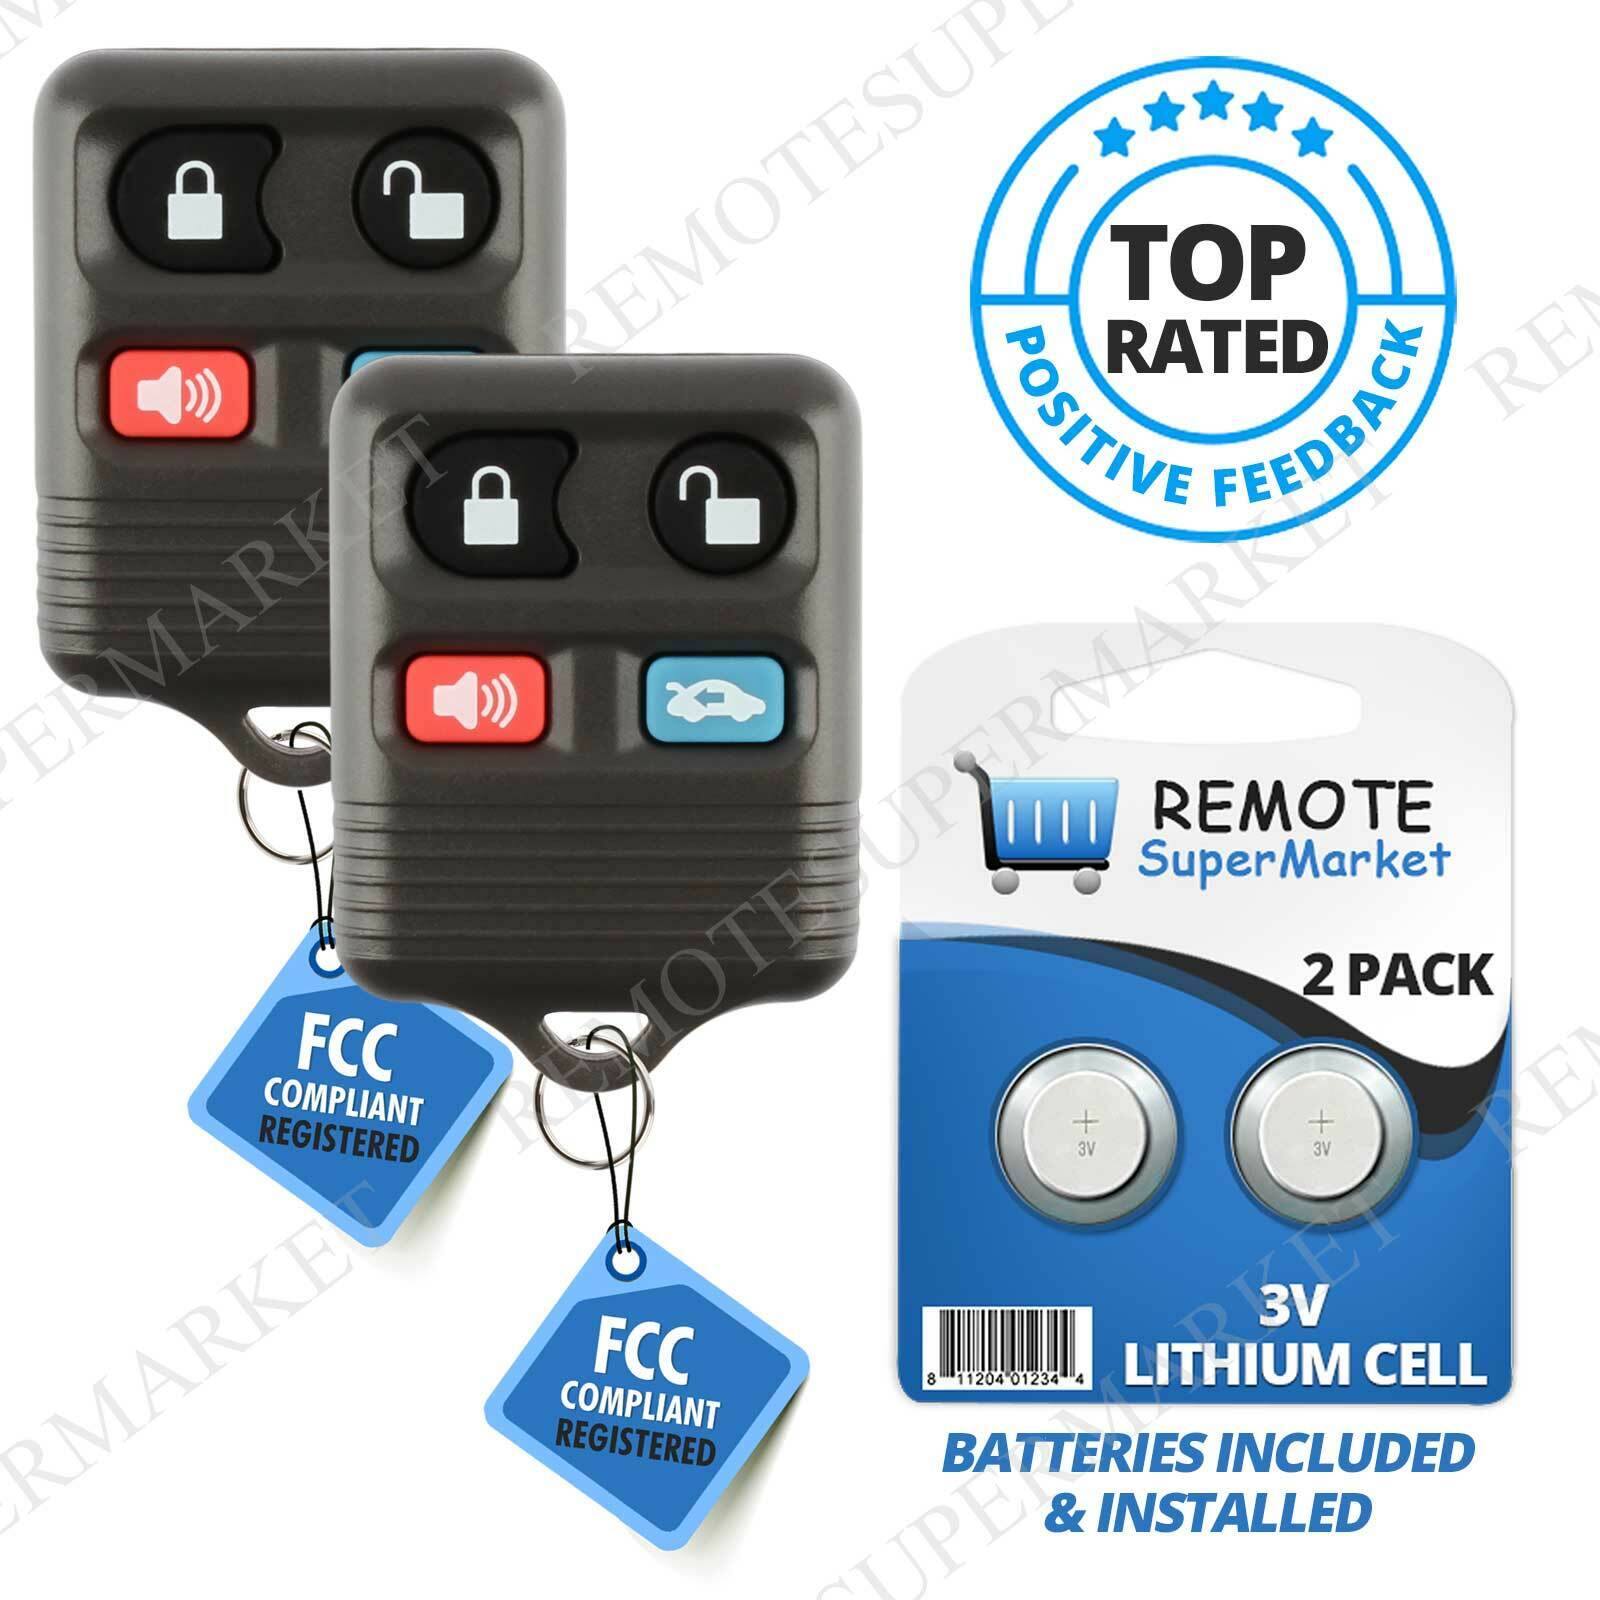 Replacement for 1995-2006 Mercury Grand Marquis Remote Car Keyless Key Fob Pair